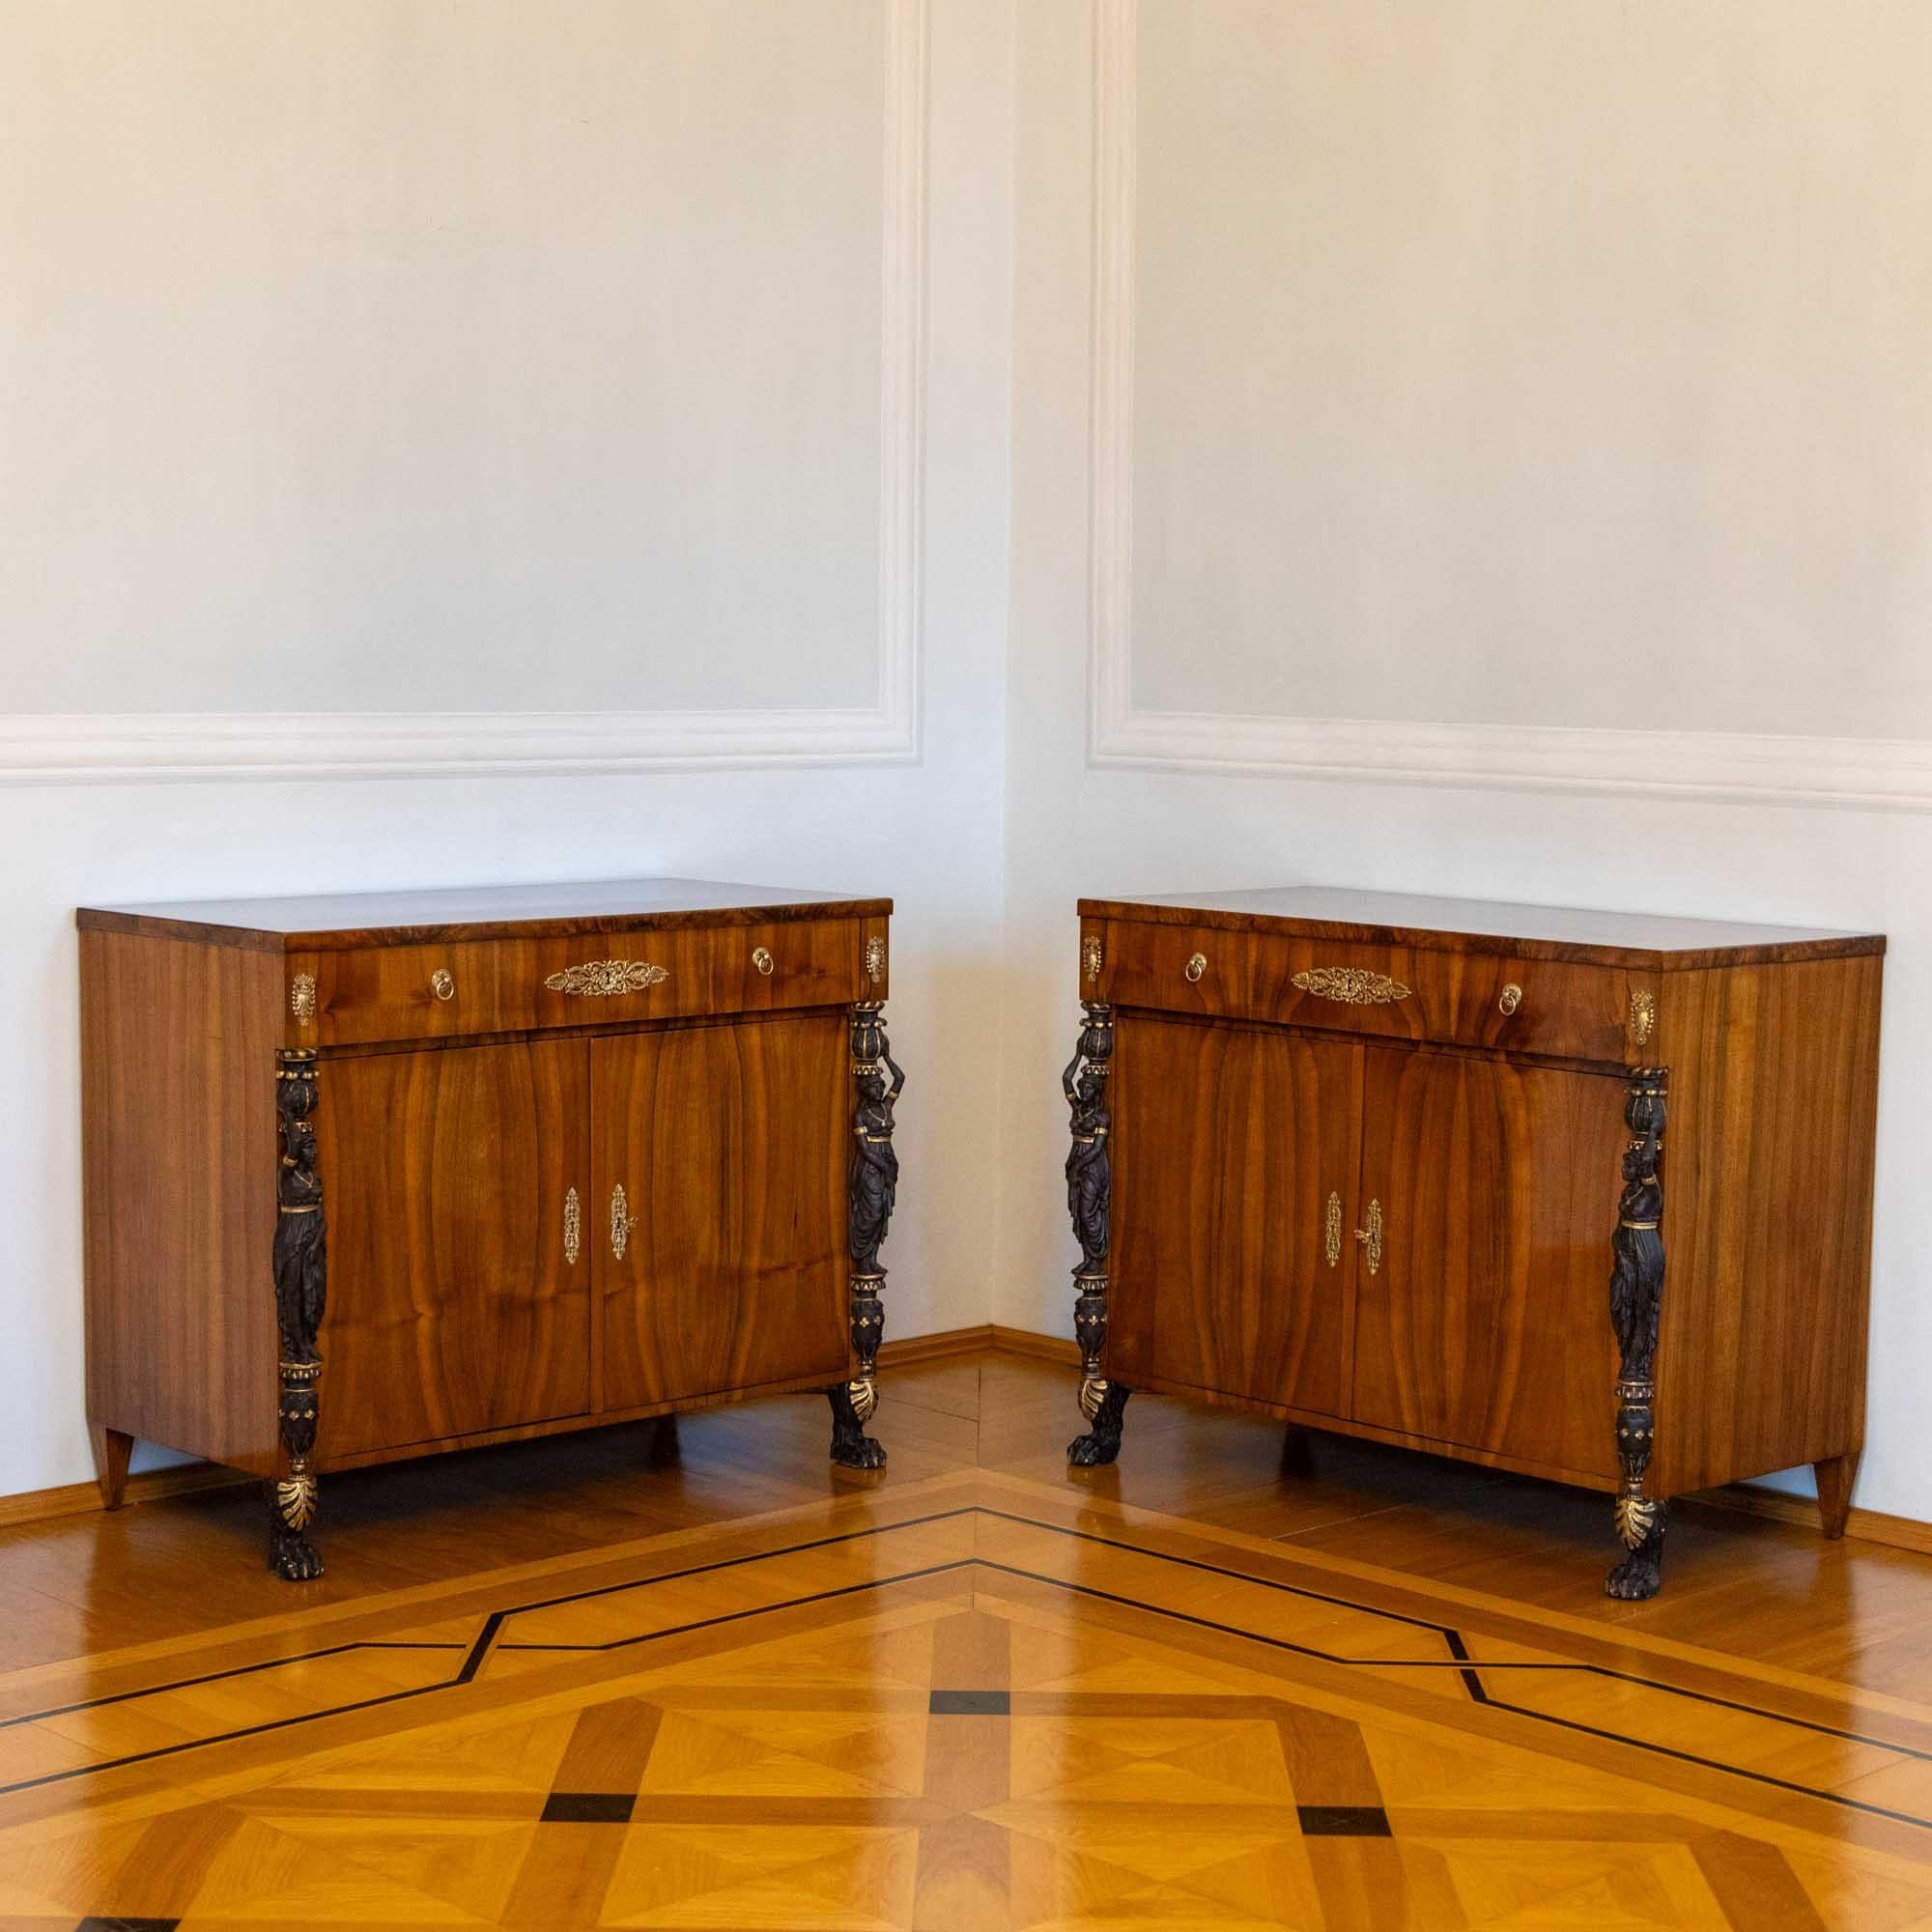 Pair of trumeau sideboards with flanking carved caryatids in the Retour d'Egypte style. The sideboards are fitted with two doors and a wide drawer. The carved figures are blackened and the details are heightened in gold. The rich fittings in